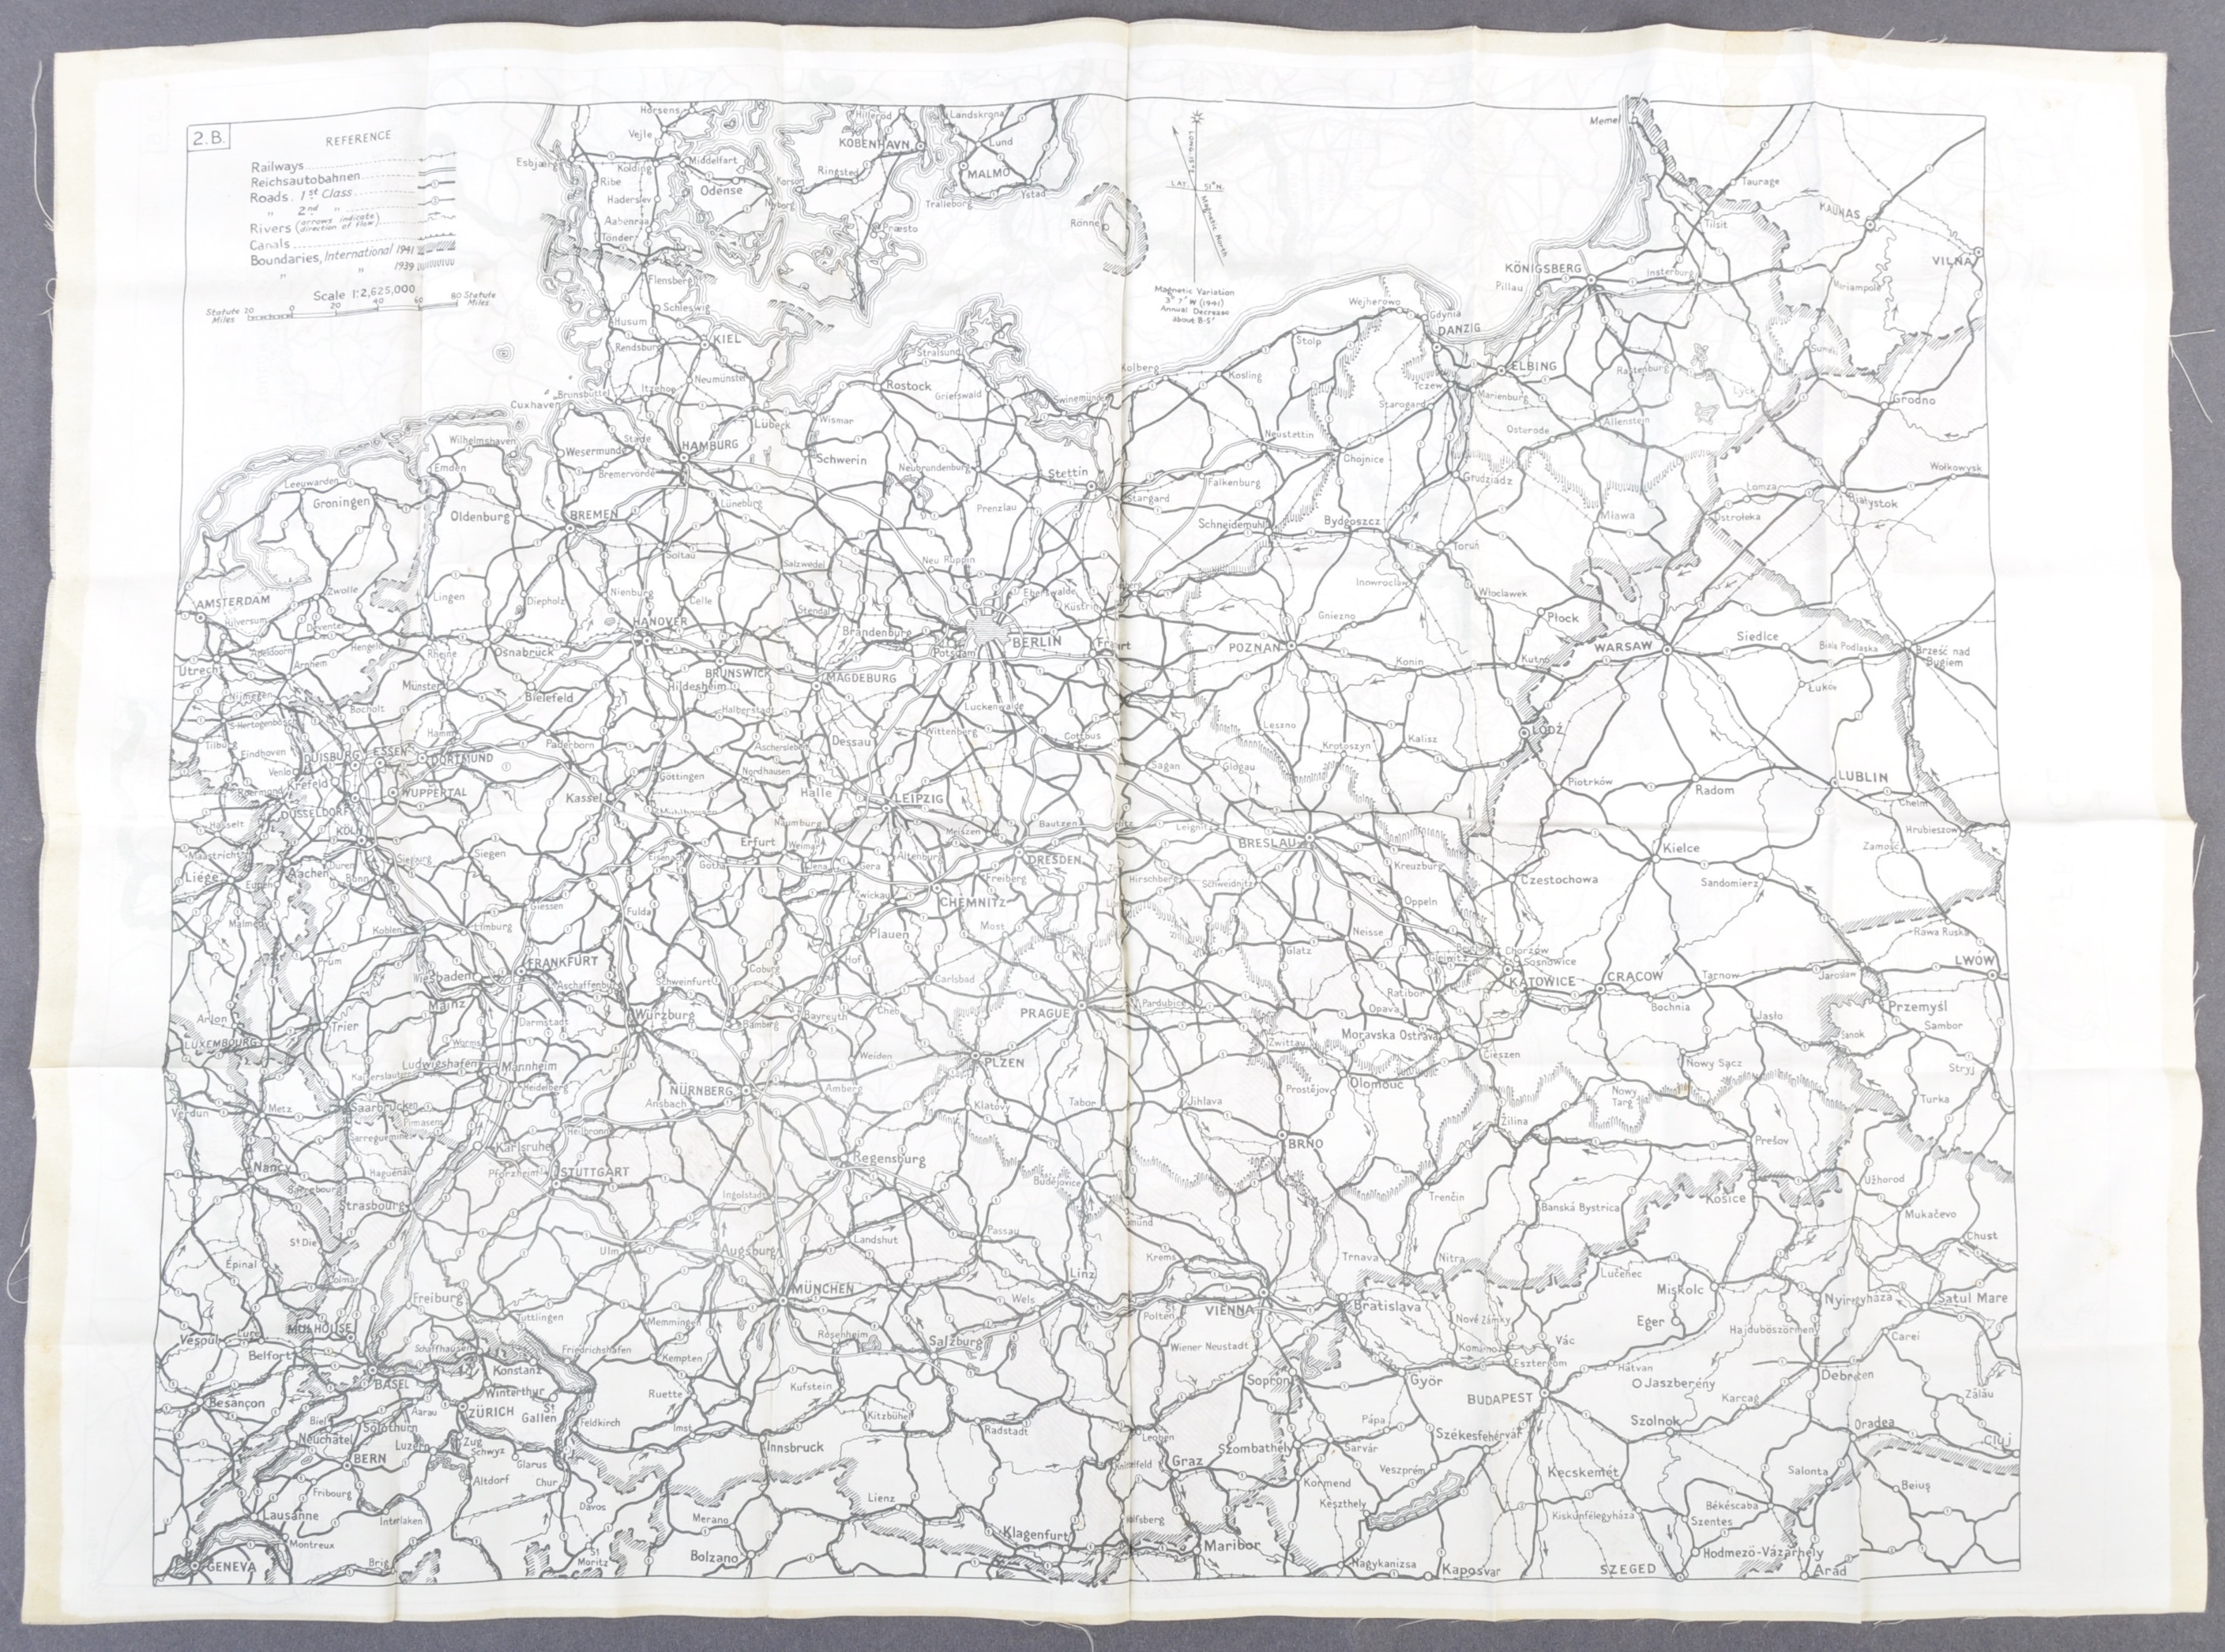 WWII SECOND WORLD WAR SILK ESCAPE MAP - FRANCE - Image 4 of 4